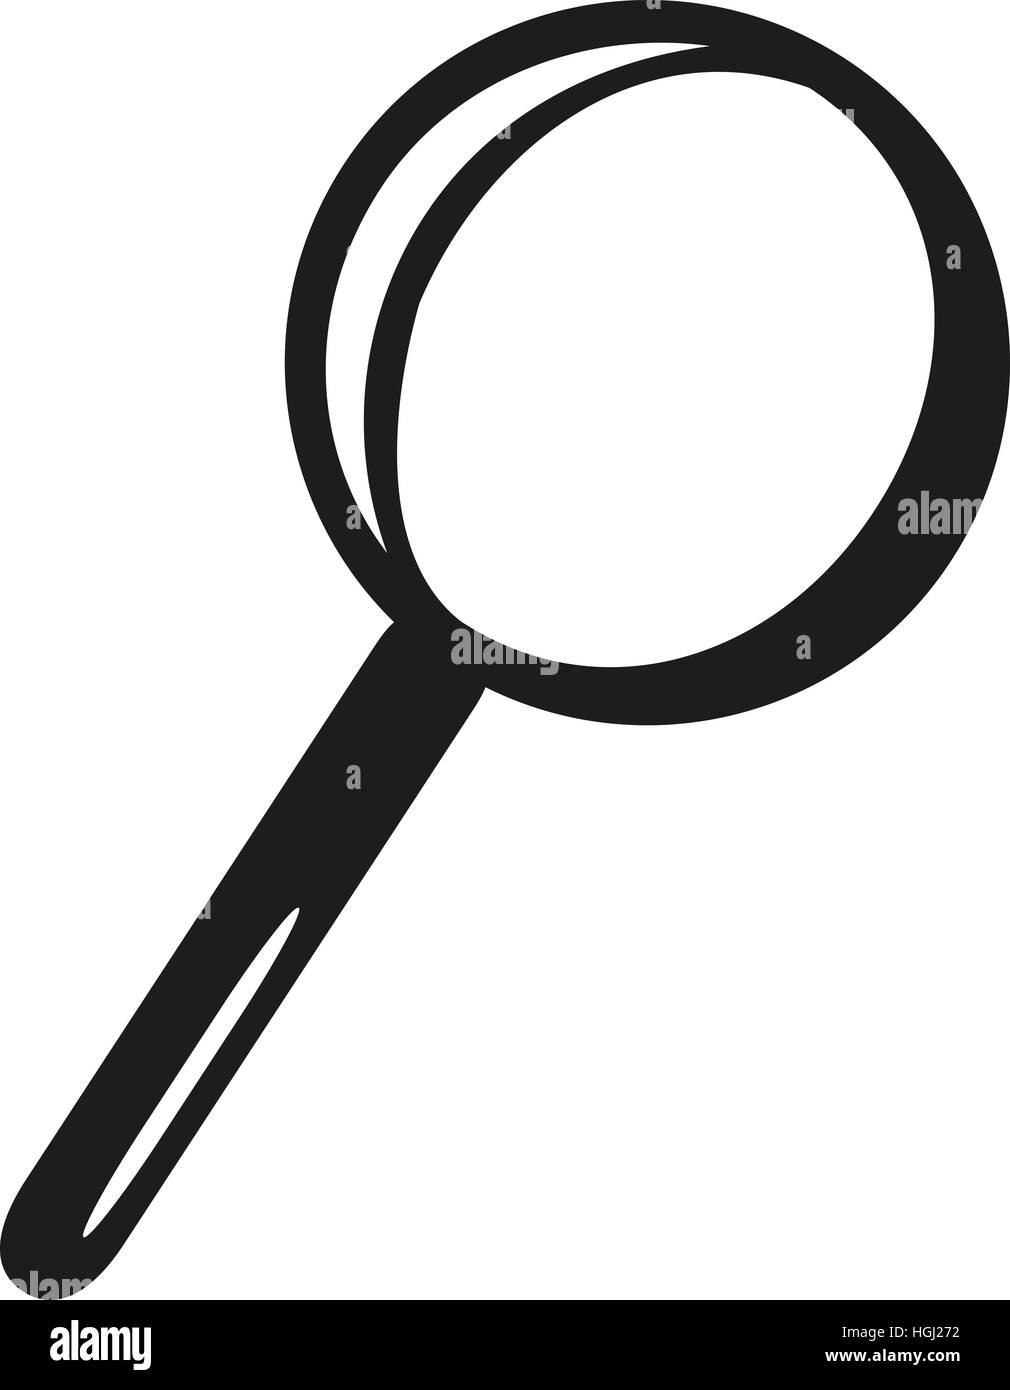 Magnifying glass silhouette Stock Photo